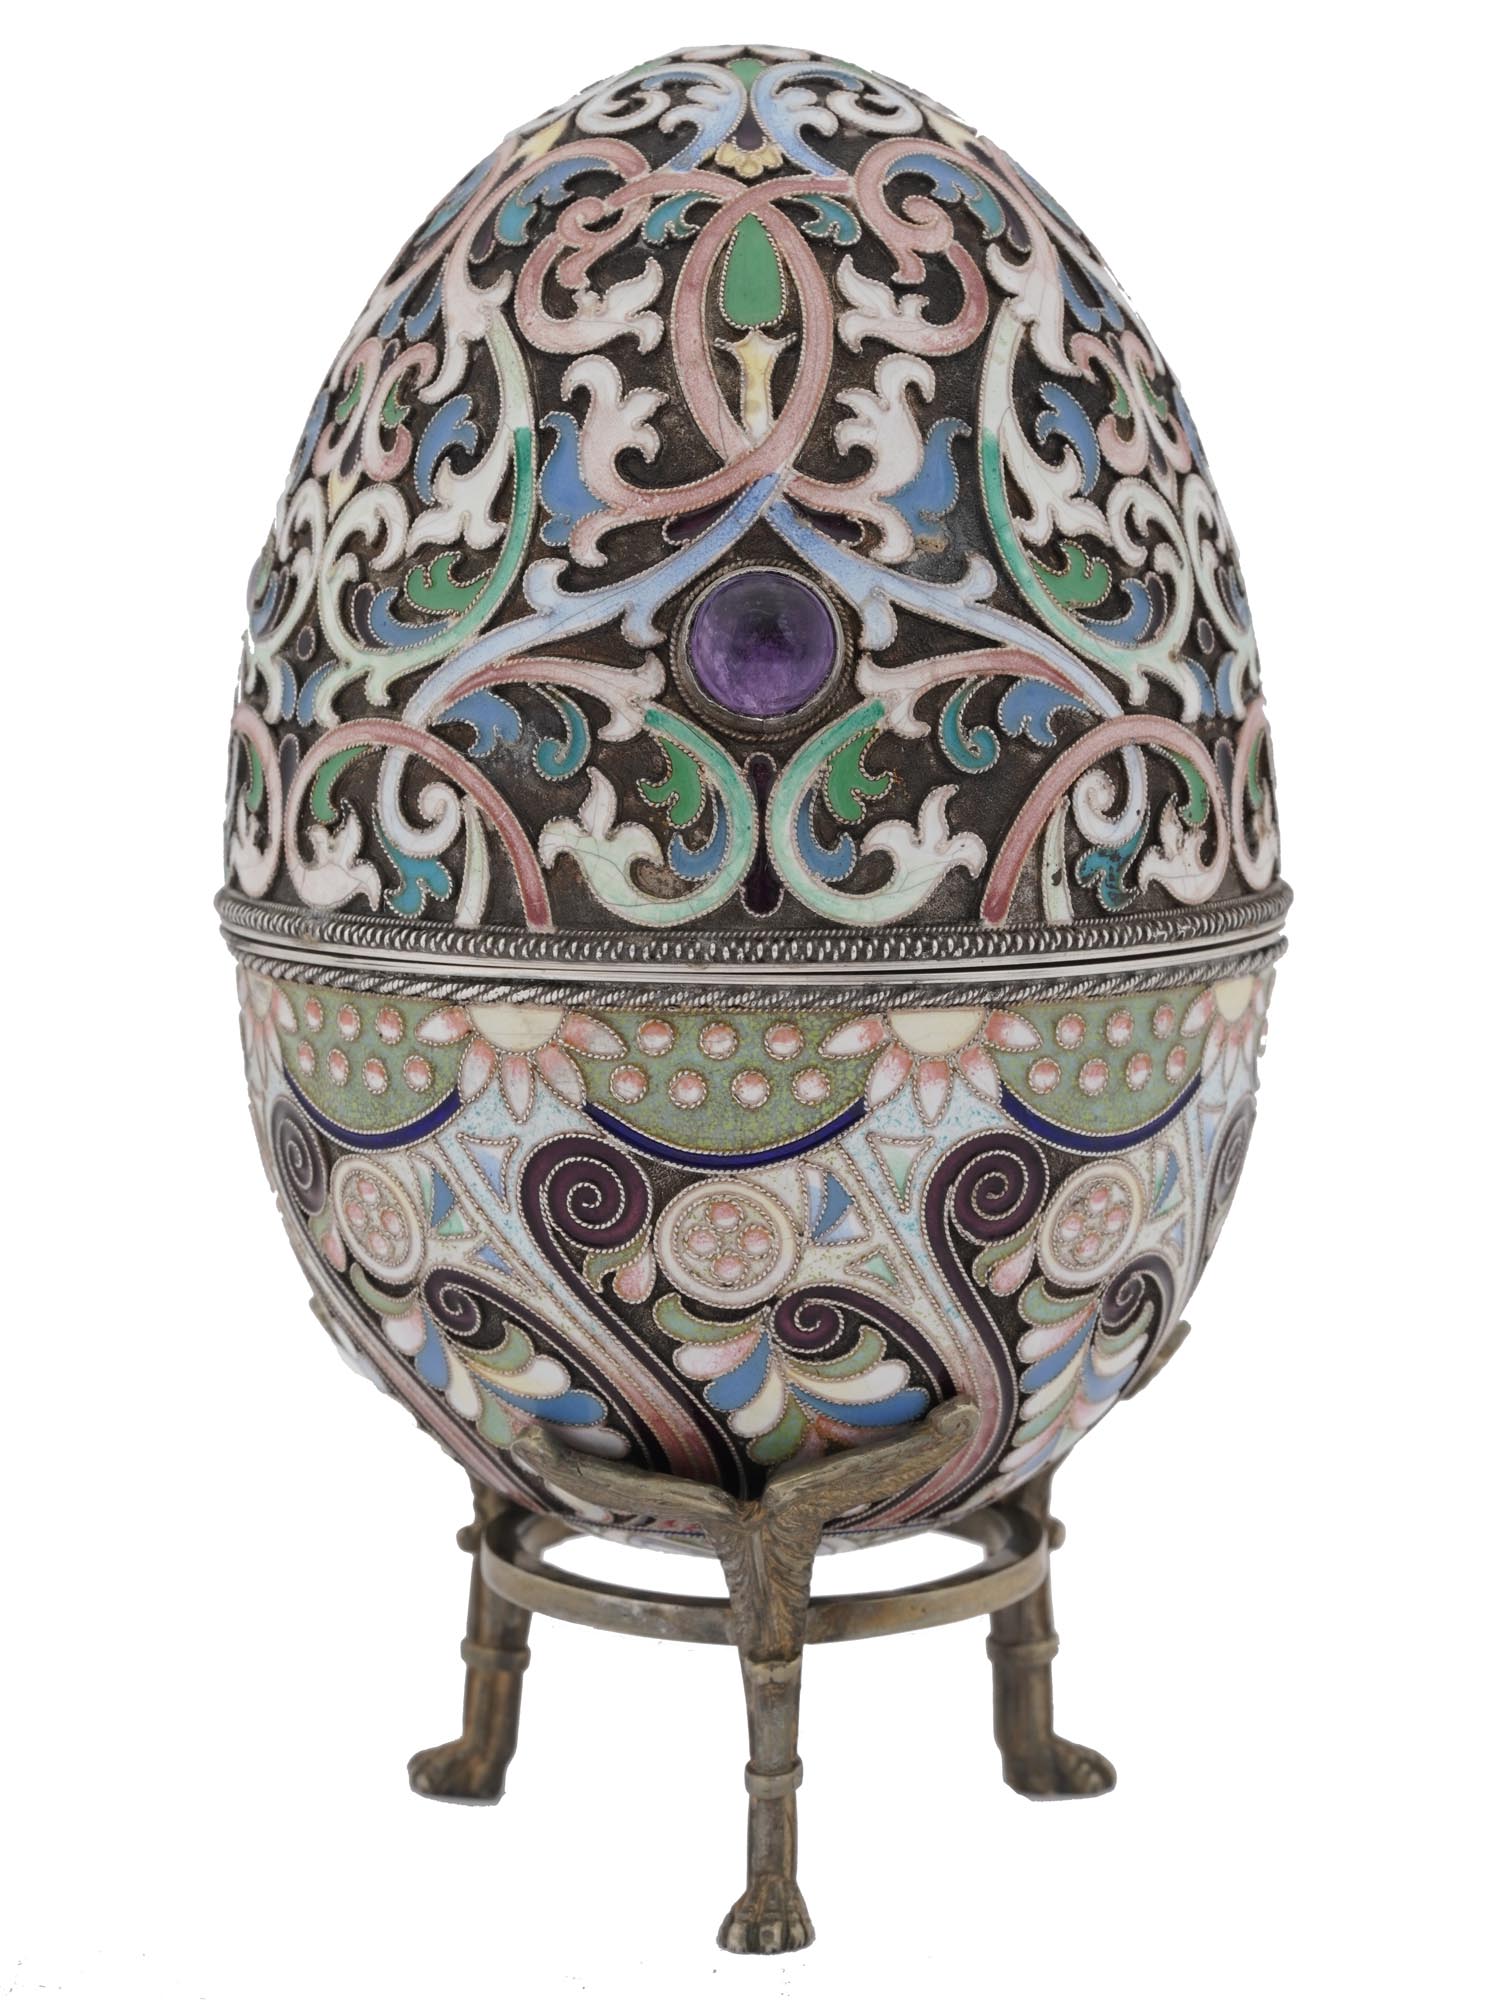 LARGE RUSSIAN SILVER ENAMEL EGG CASKET WITH STAND PIC-0